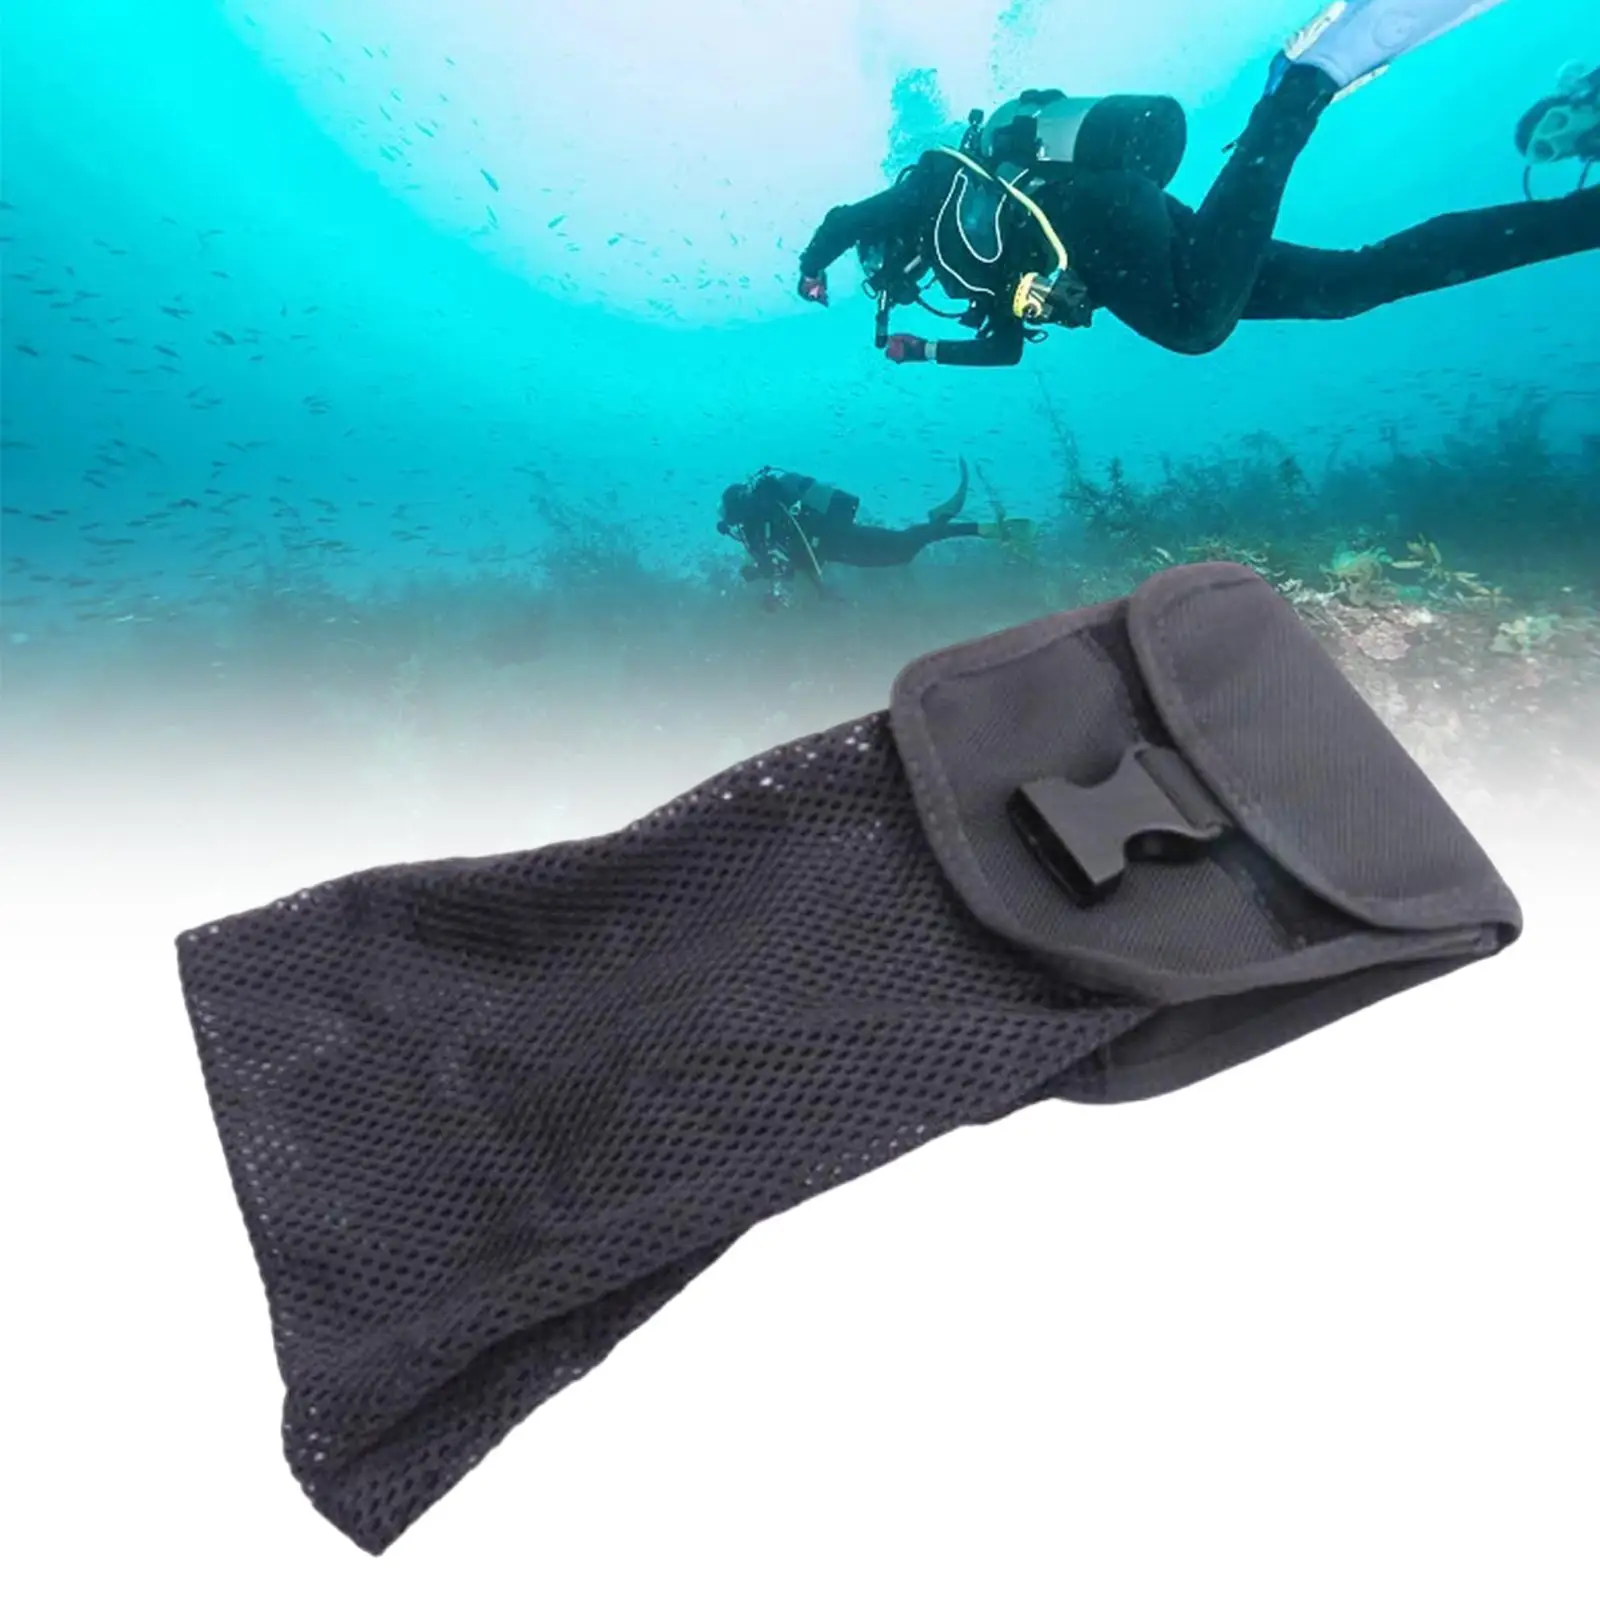  Storage Holder BCD Equipment Scuba Diving Mesh Pouch for Flippers